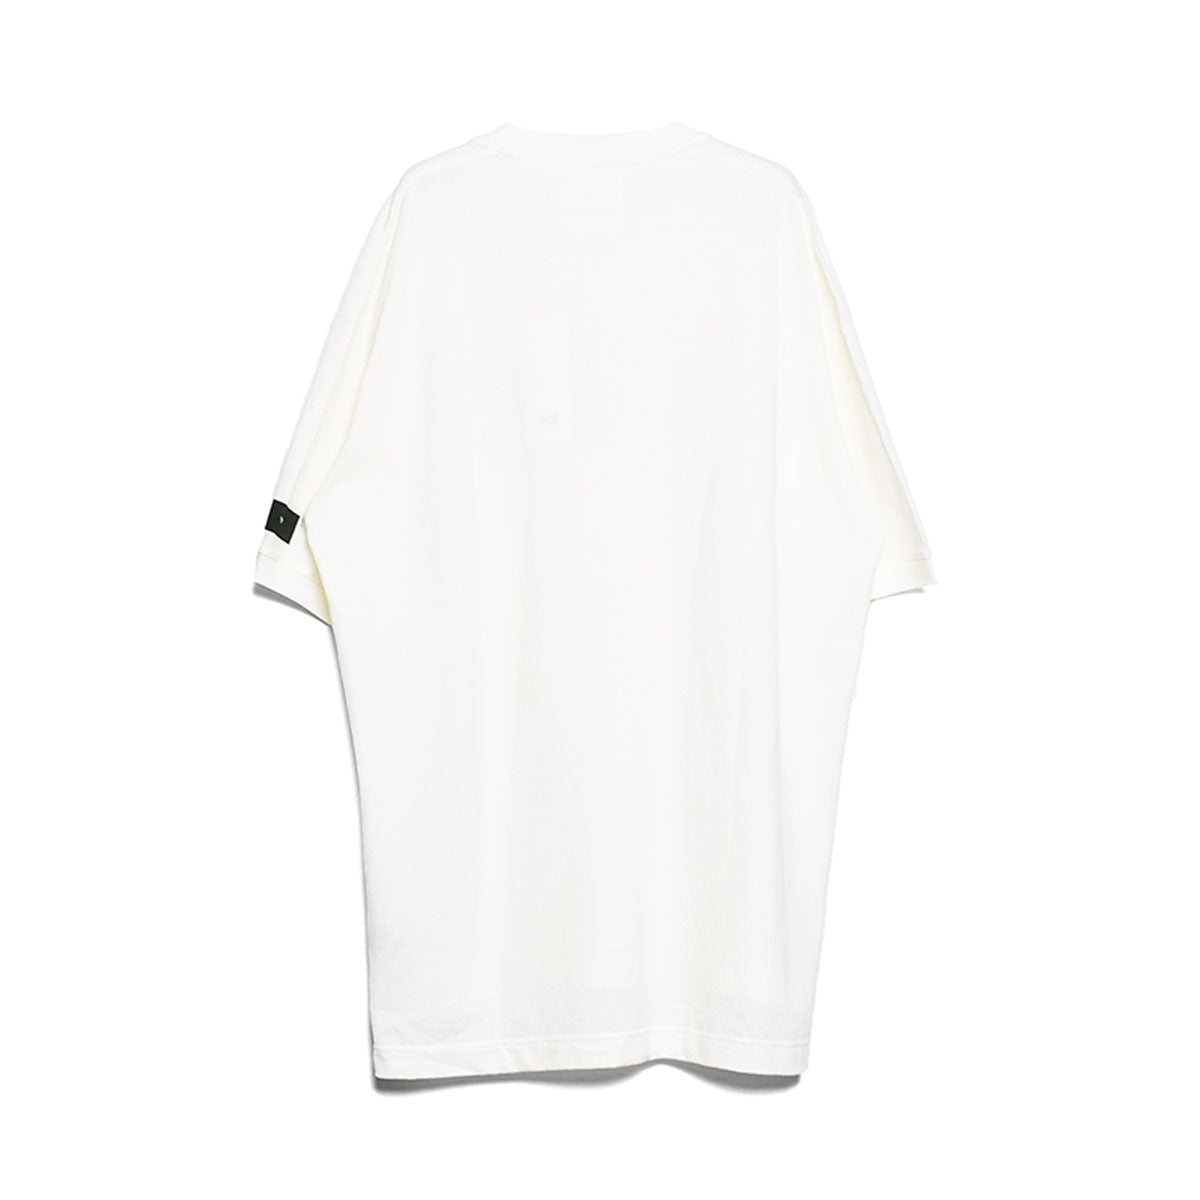 Y-3]WRKWR TEE/OFF WHITE(HZ8842-APPS23) – R&Co.